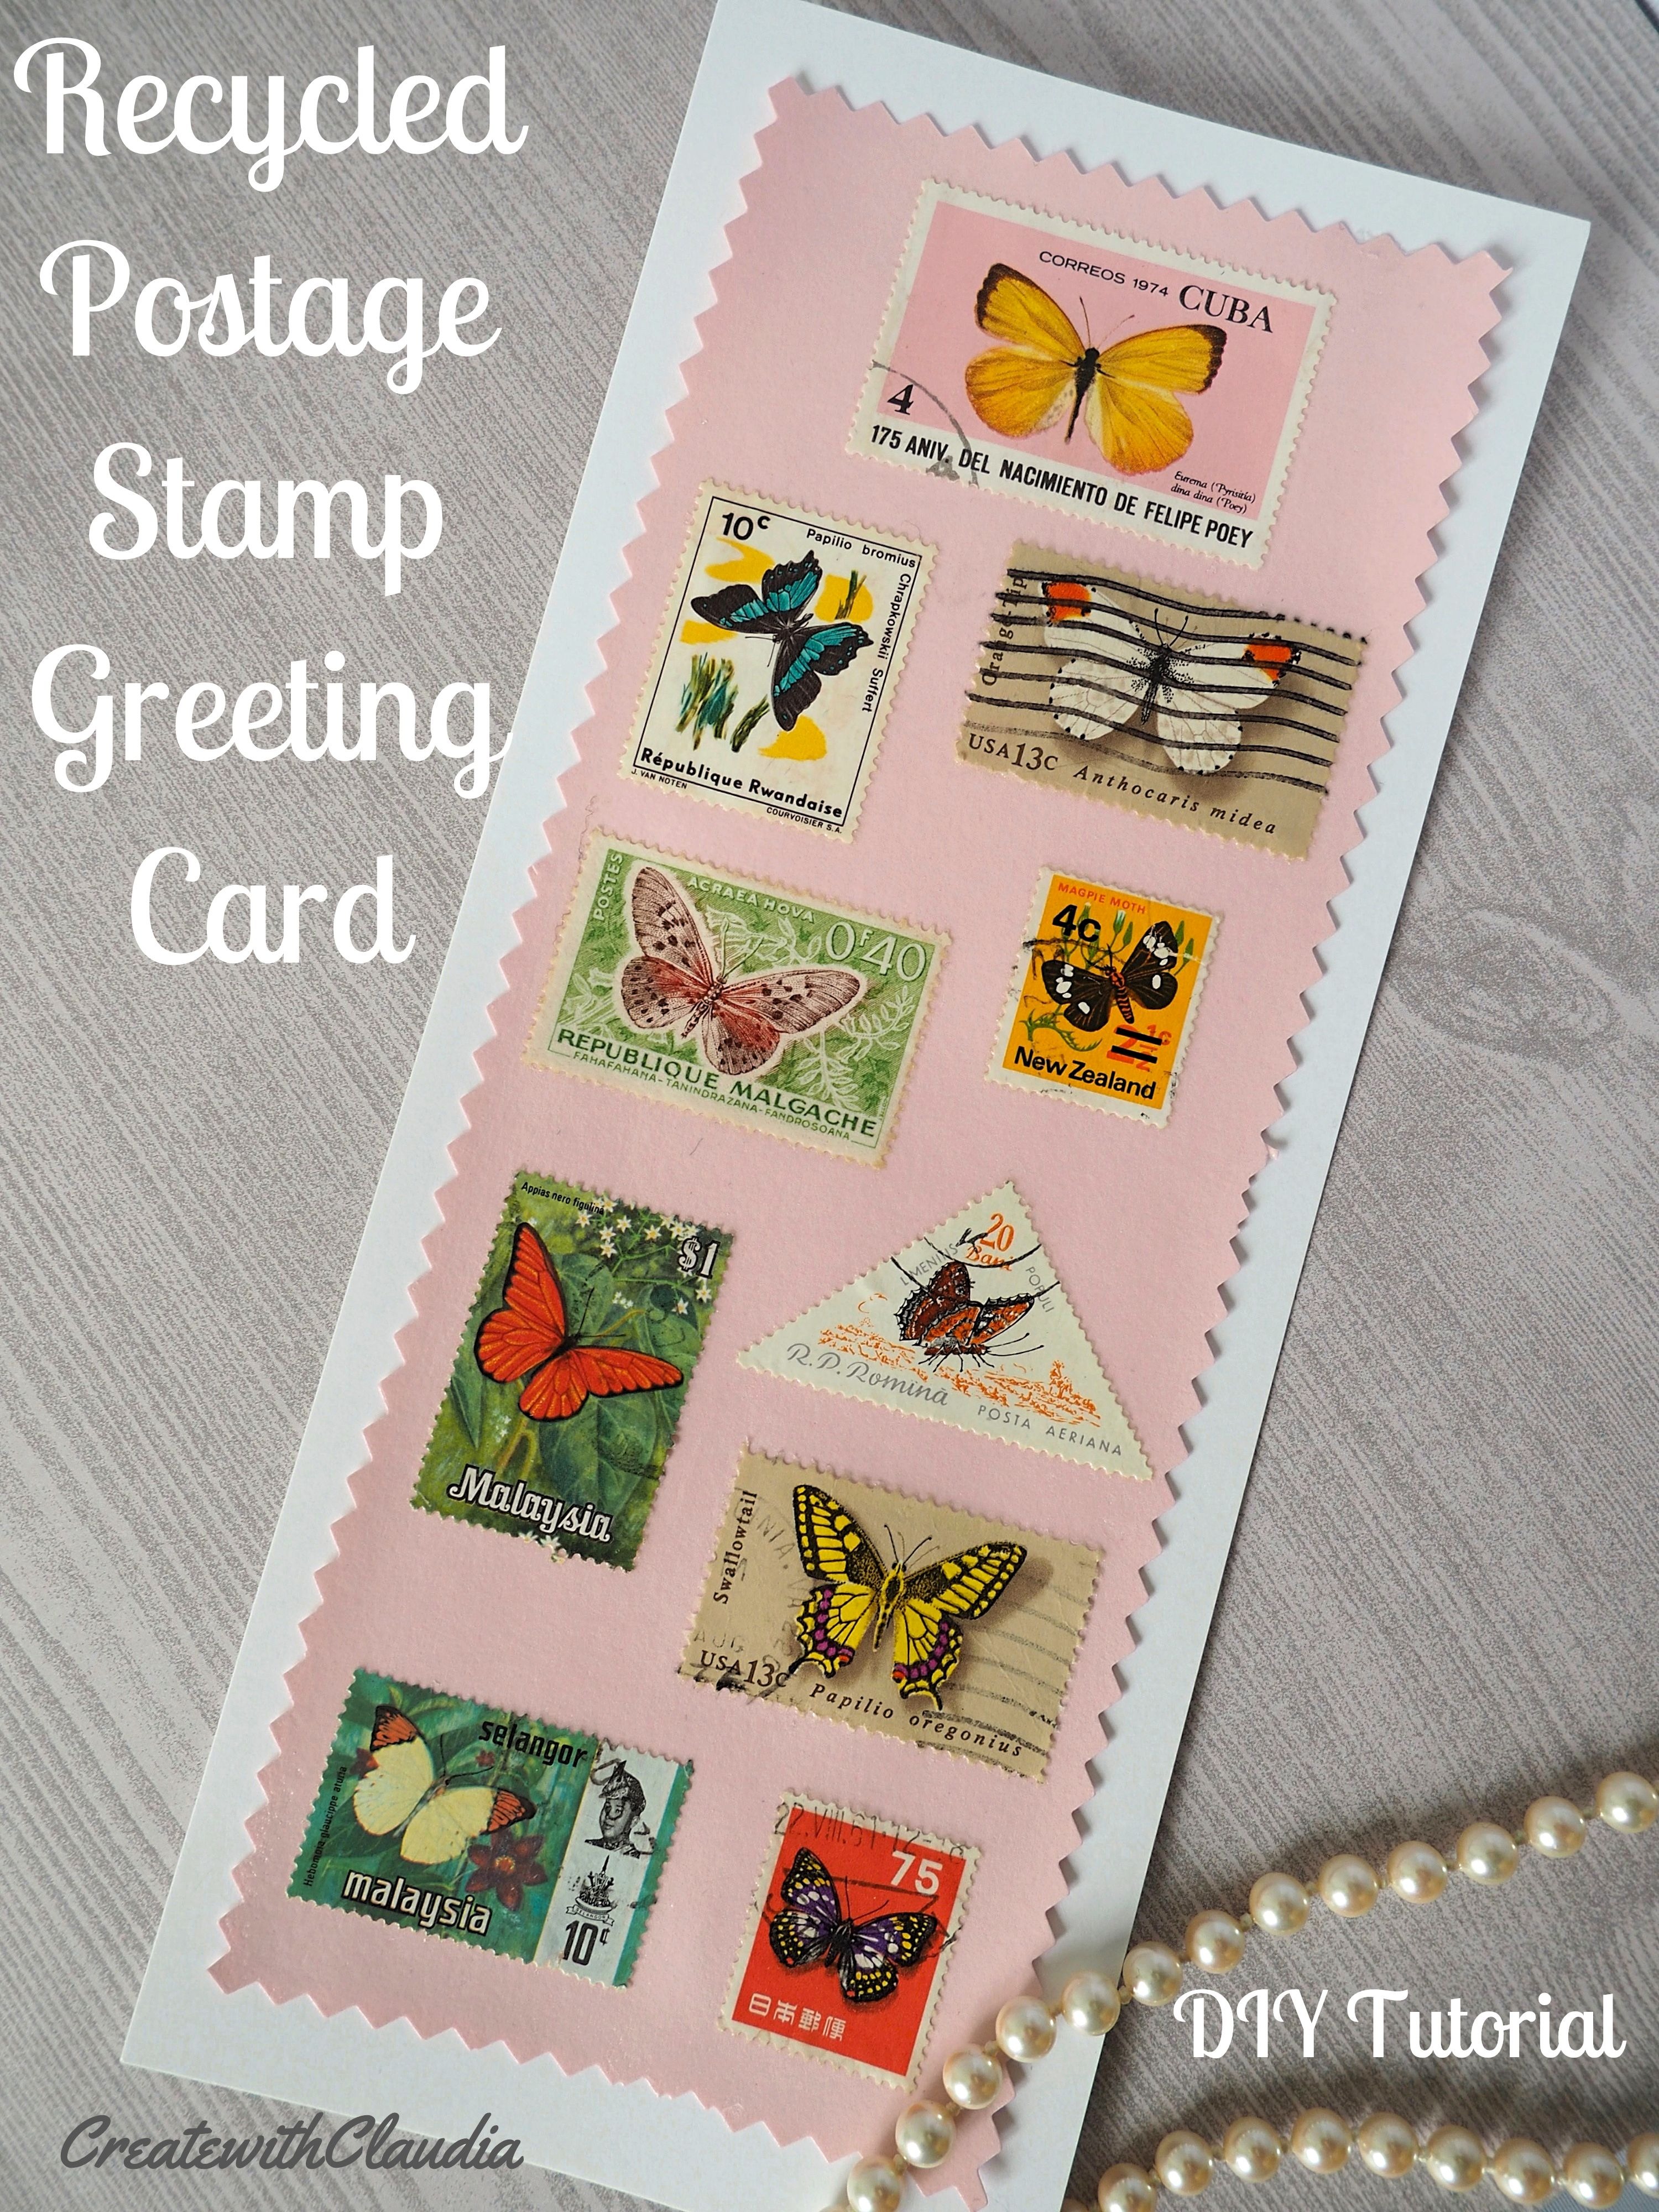 Recycled Puzzle Stamps (A Tutorial)